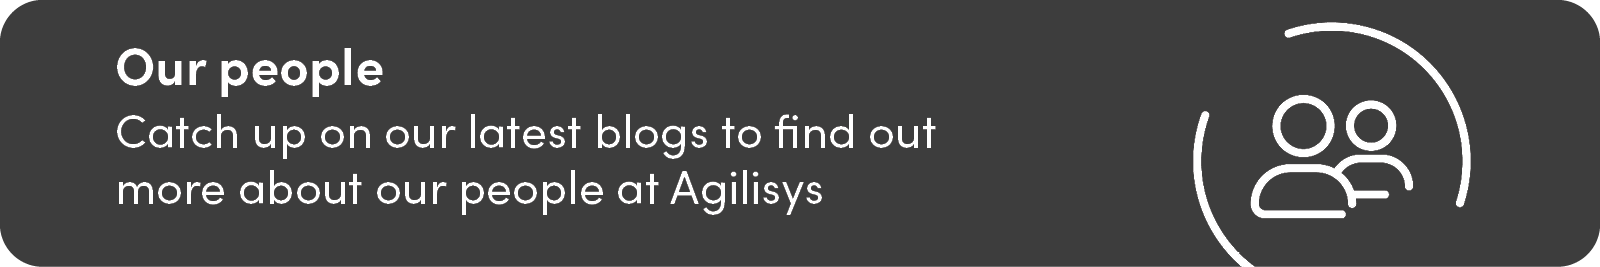 Agilisys - our people